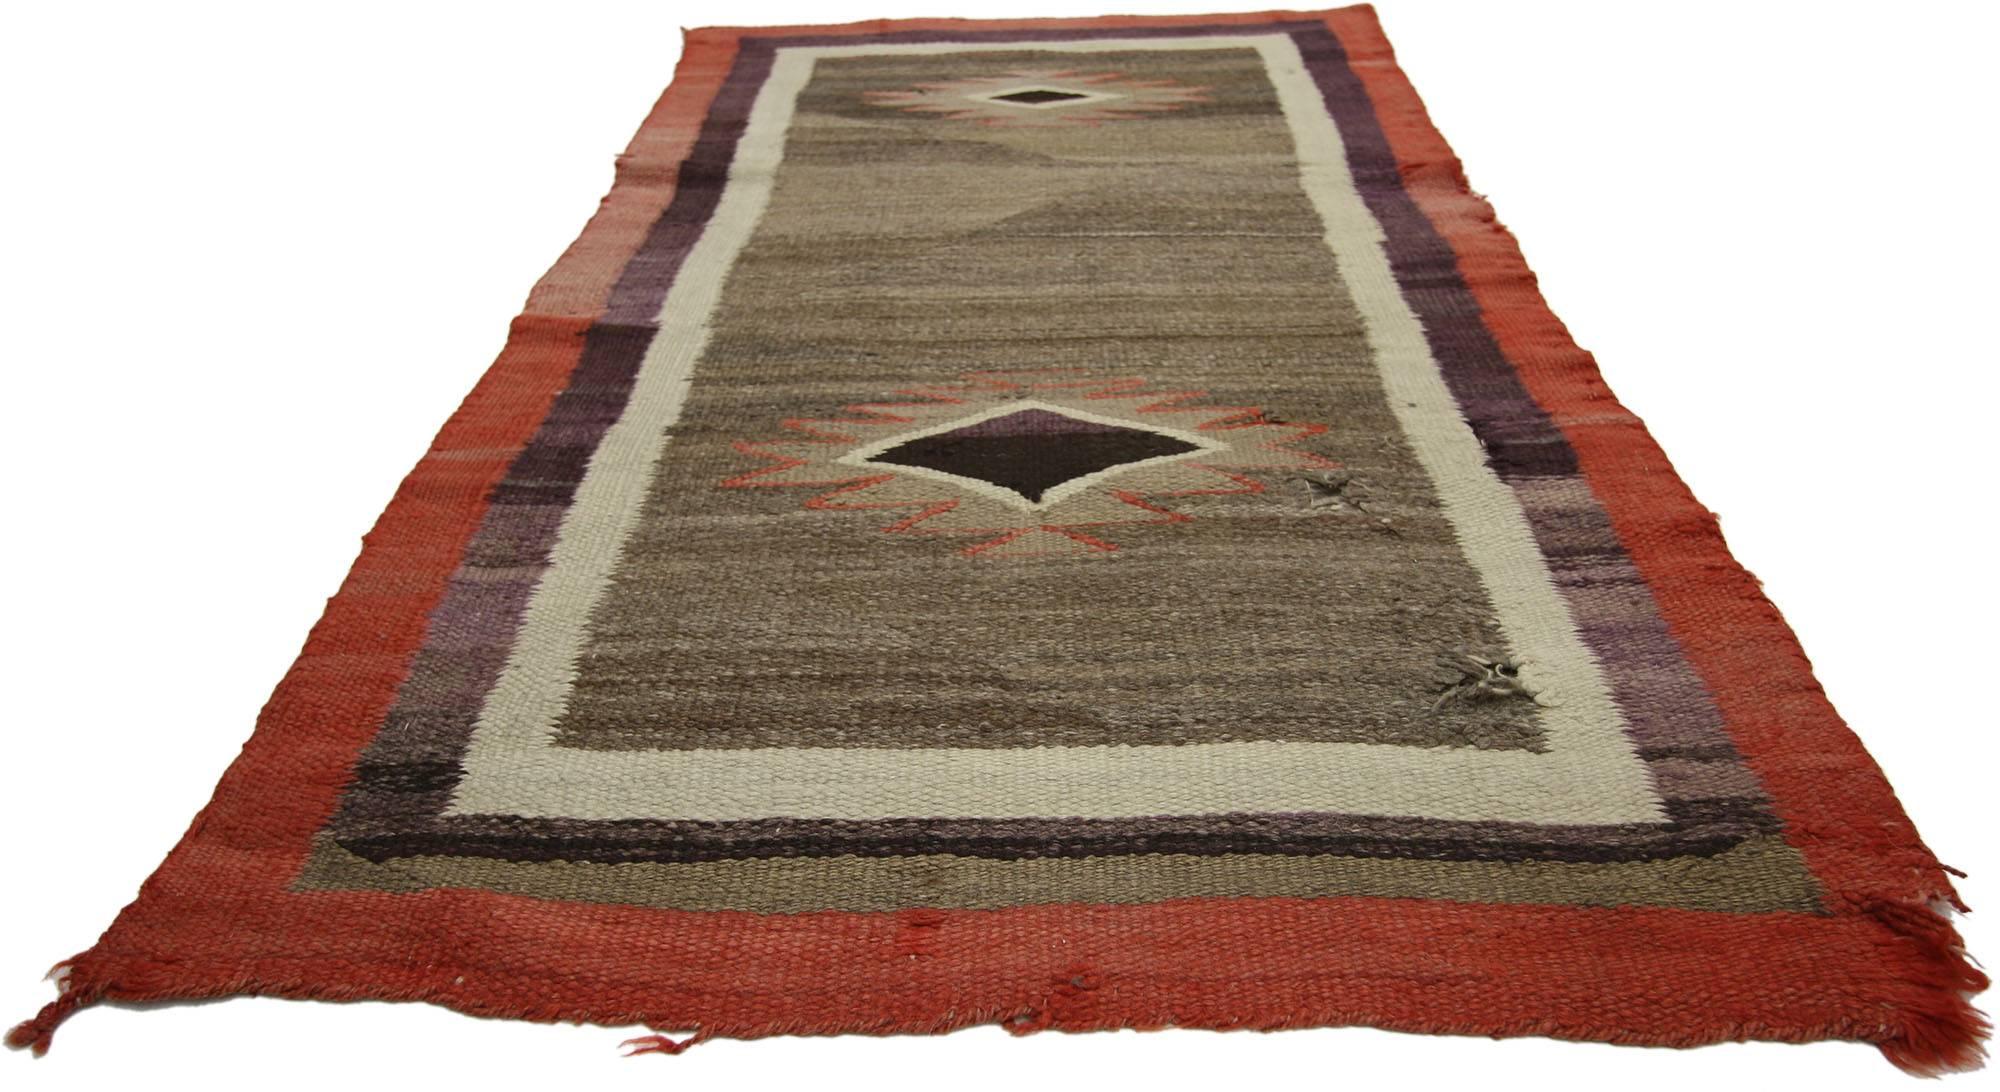 Native American Antique Indian Navajo Kilim Rug with Southwest Style 2